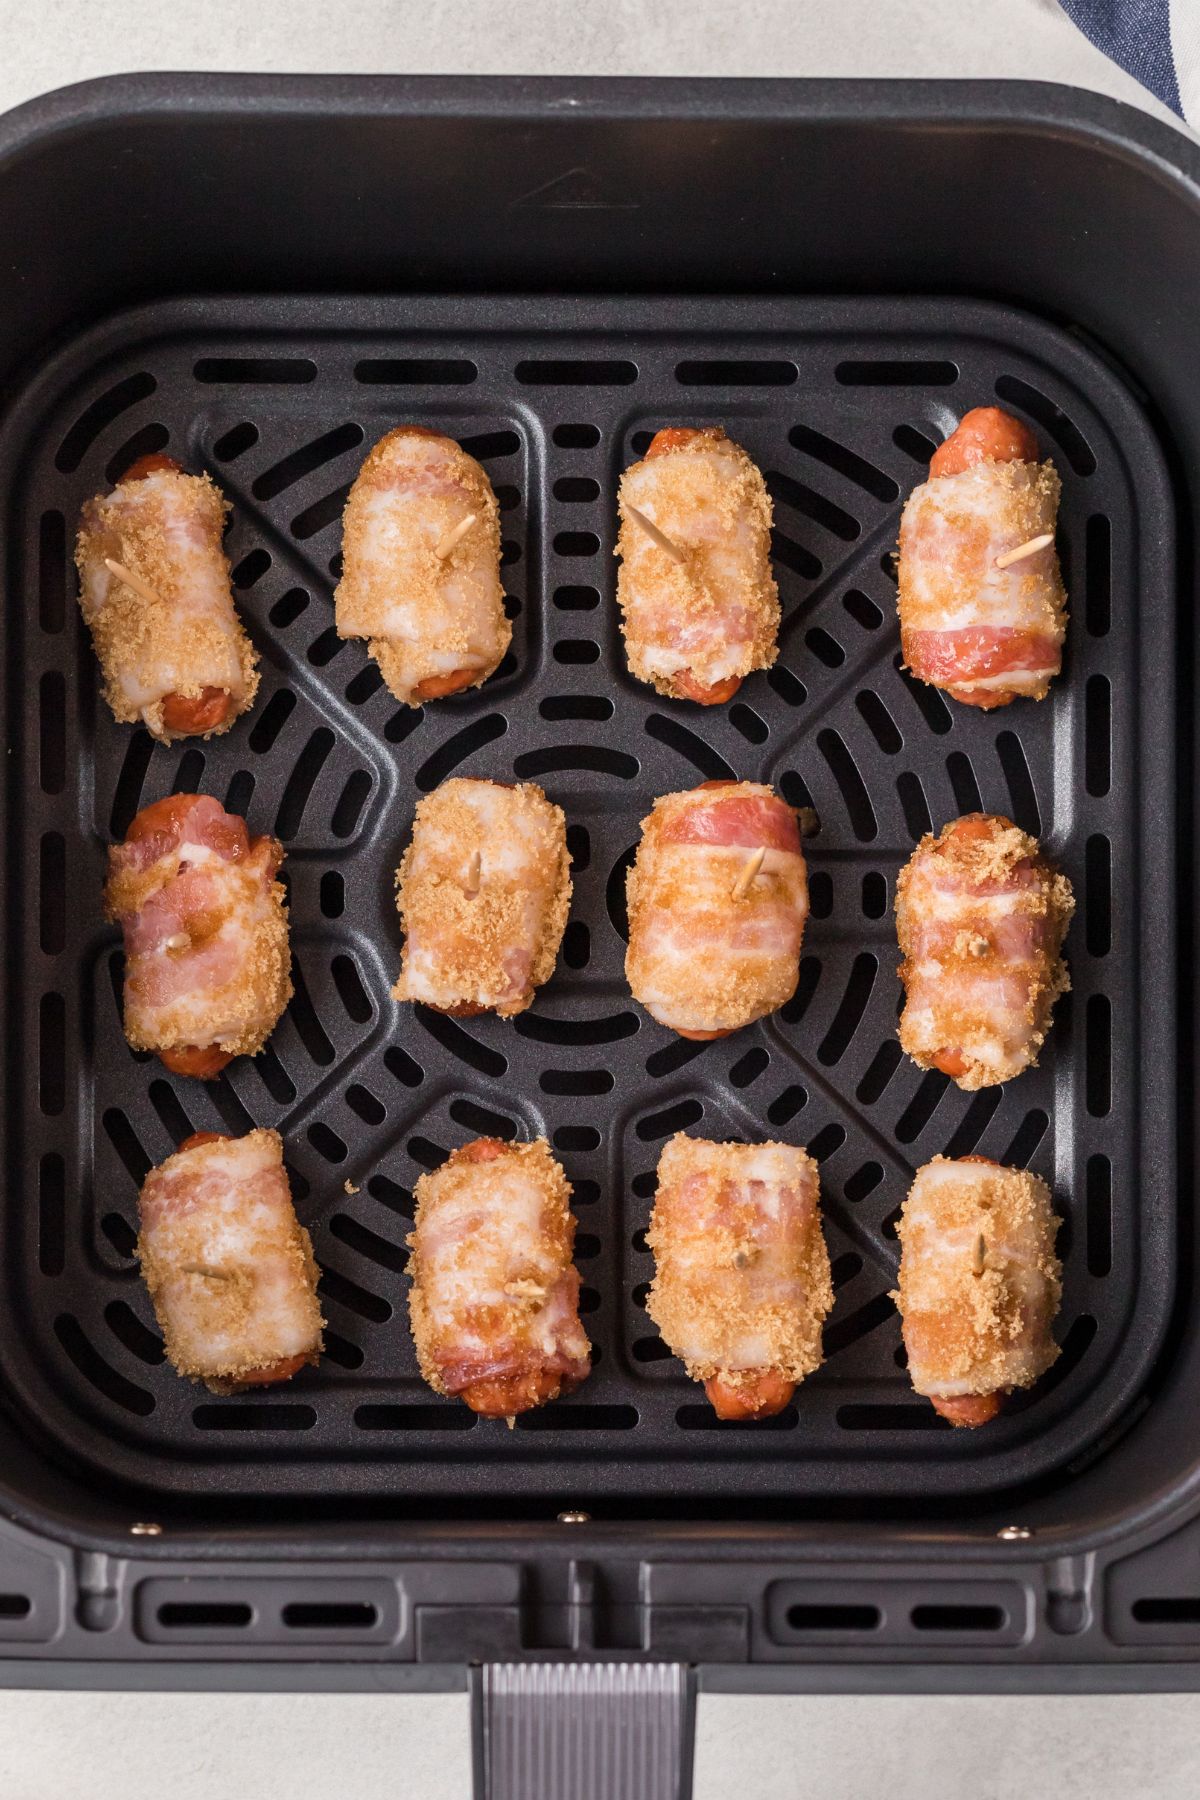 Bacon wrapped smokies, coated in brown sugar and placed in the air fryer basket.